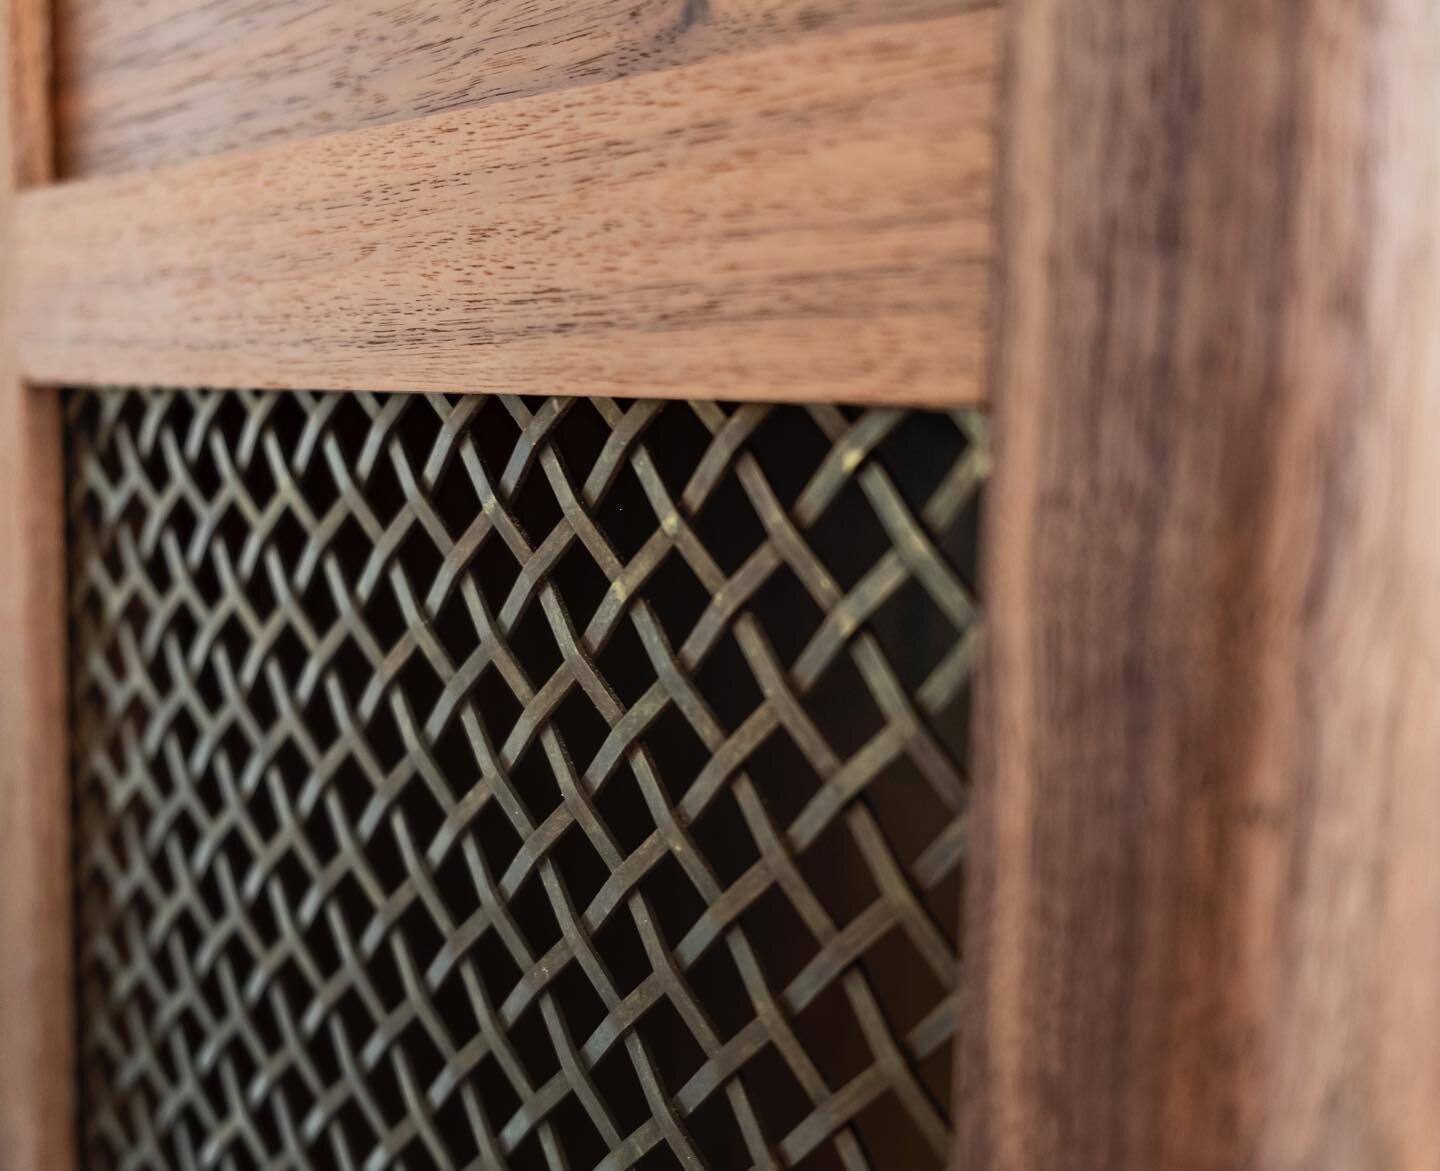 The woven brass mesh we used for our hallway cabinet is a heavy duty antiqued brass that is beautiful, durable, and will allow plenty of circulation for the air purifier housed within.
.
.
.

#workshop #furnitureMaker #bespoke #customFurniture #commi